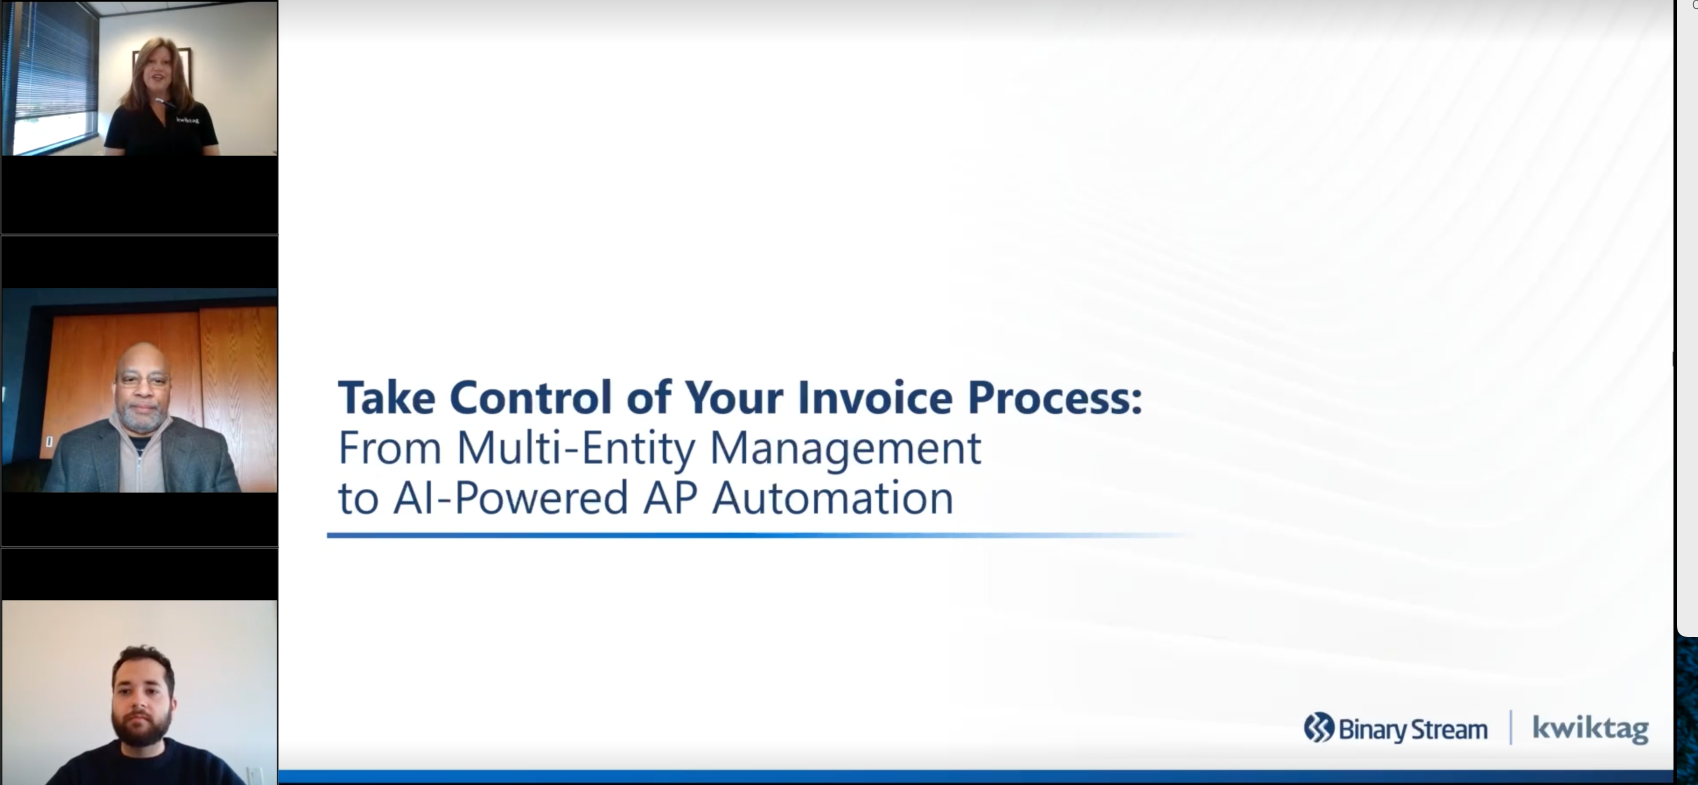 Take Control of Your Invoice Process From Multi-Entity Management to AI-Powered AP Automation. BSSI x KwikTag Webinar